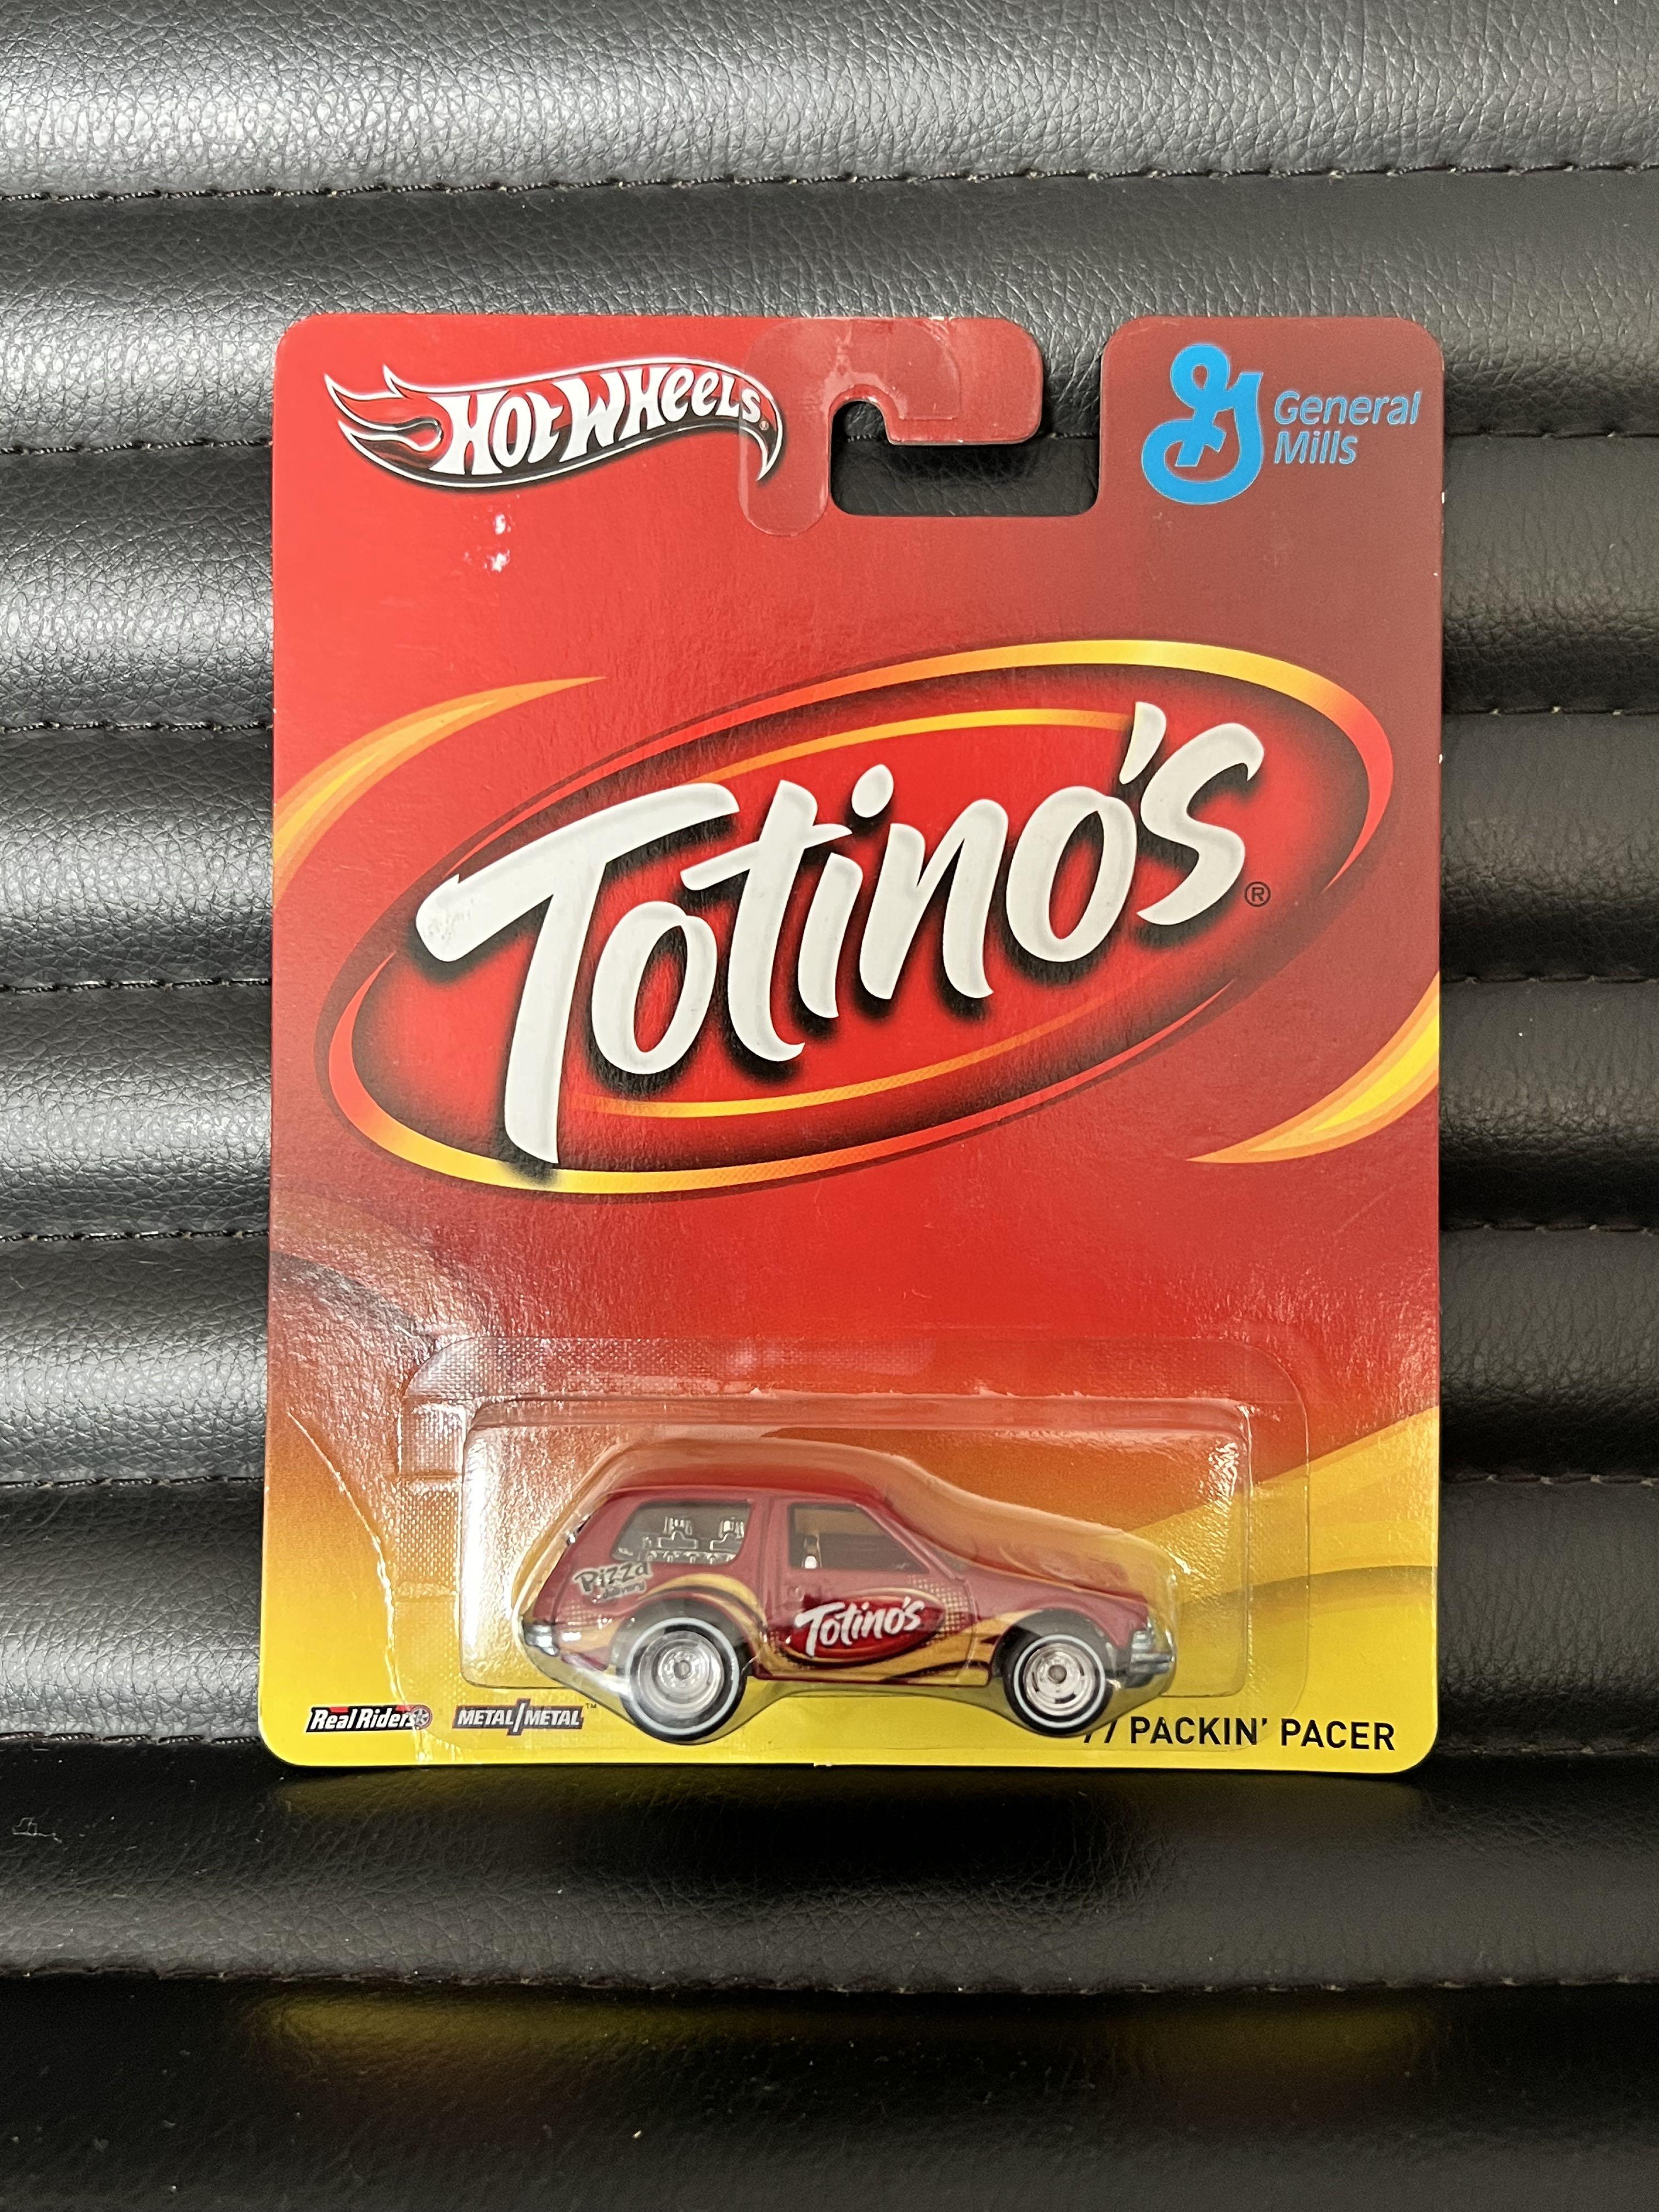 Hot Wheels Totino's Metal '77 Packin' Pacer Real Rider General Mills Red Car